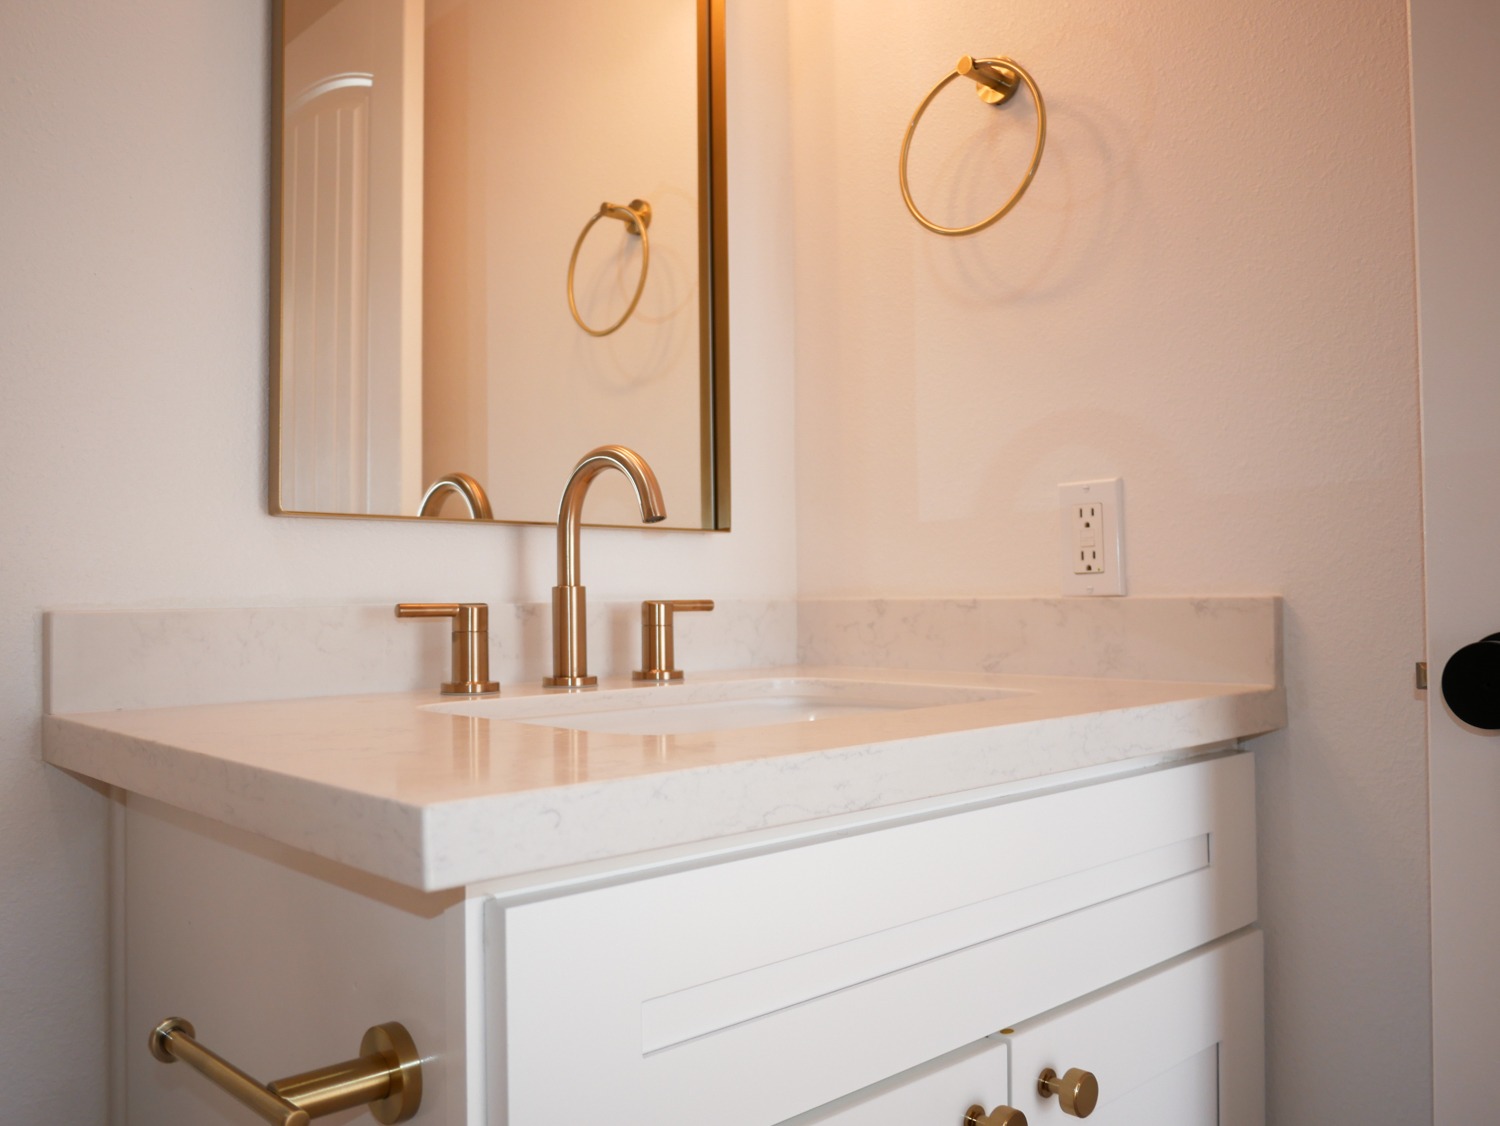 Bathroom Remodeling Benefits & Statistics for San Diego Homeowners | Octo Property Services